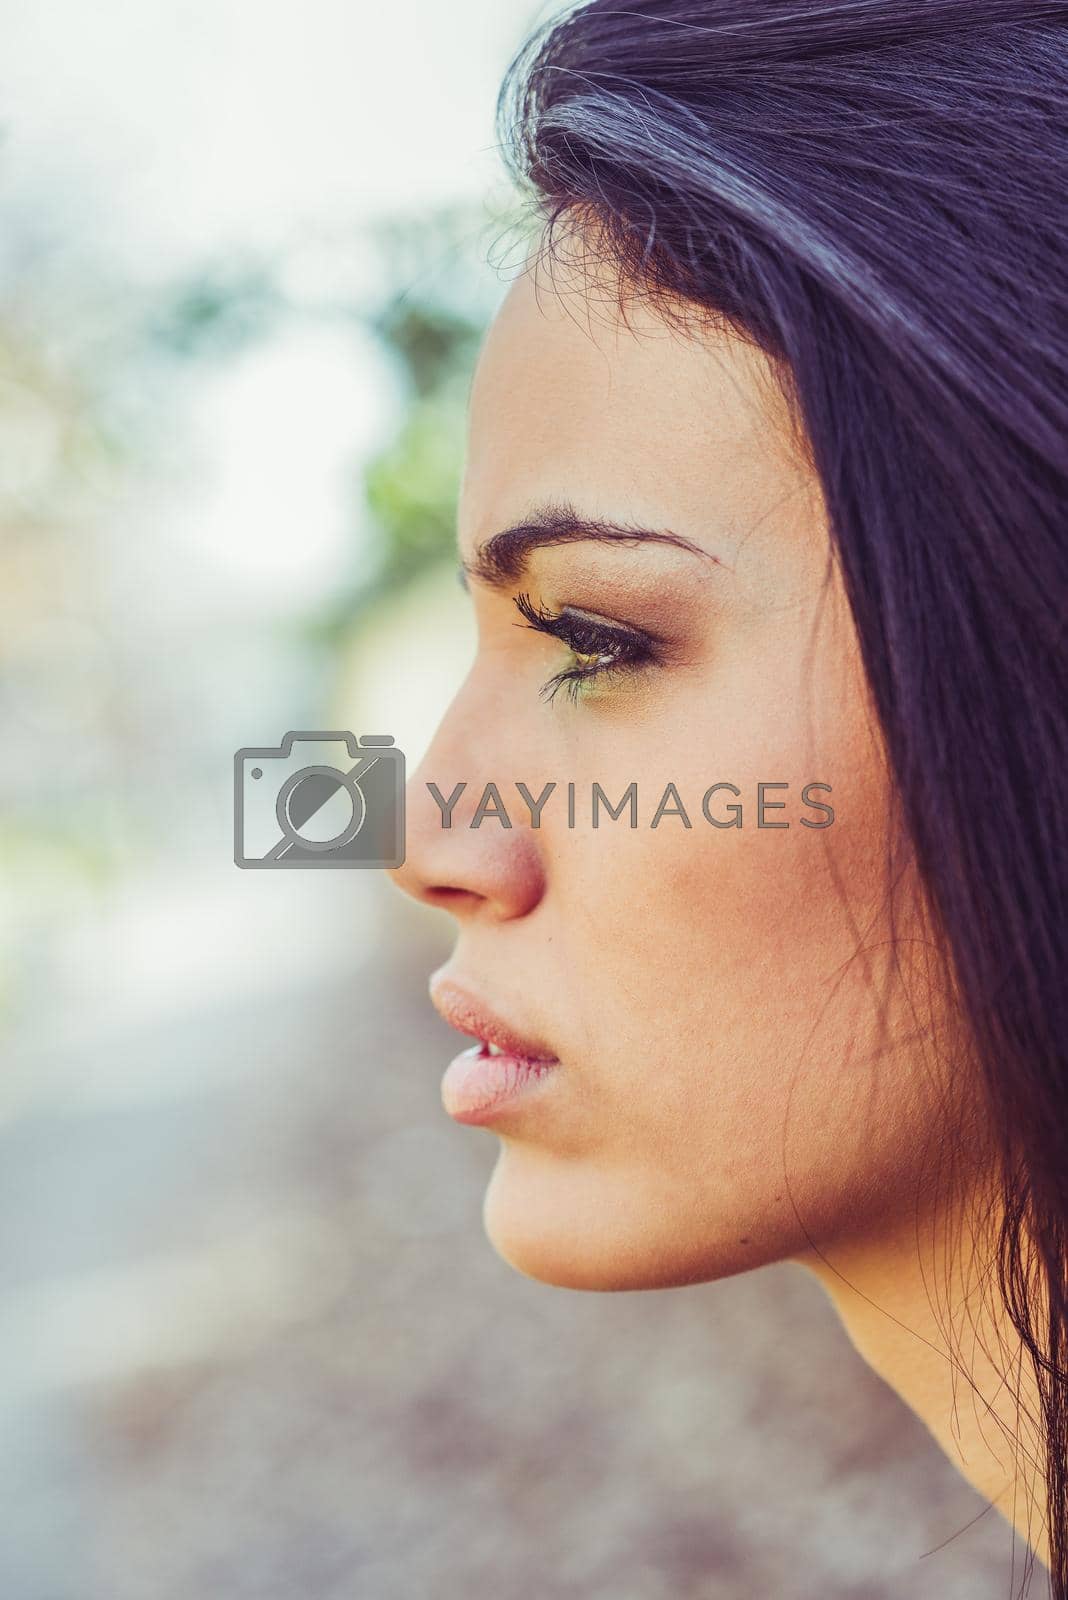 Royalty free image of Young woman with green eyes in urban background by javiindy